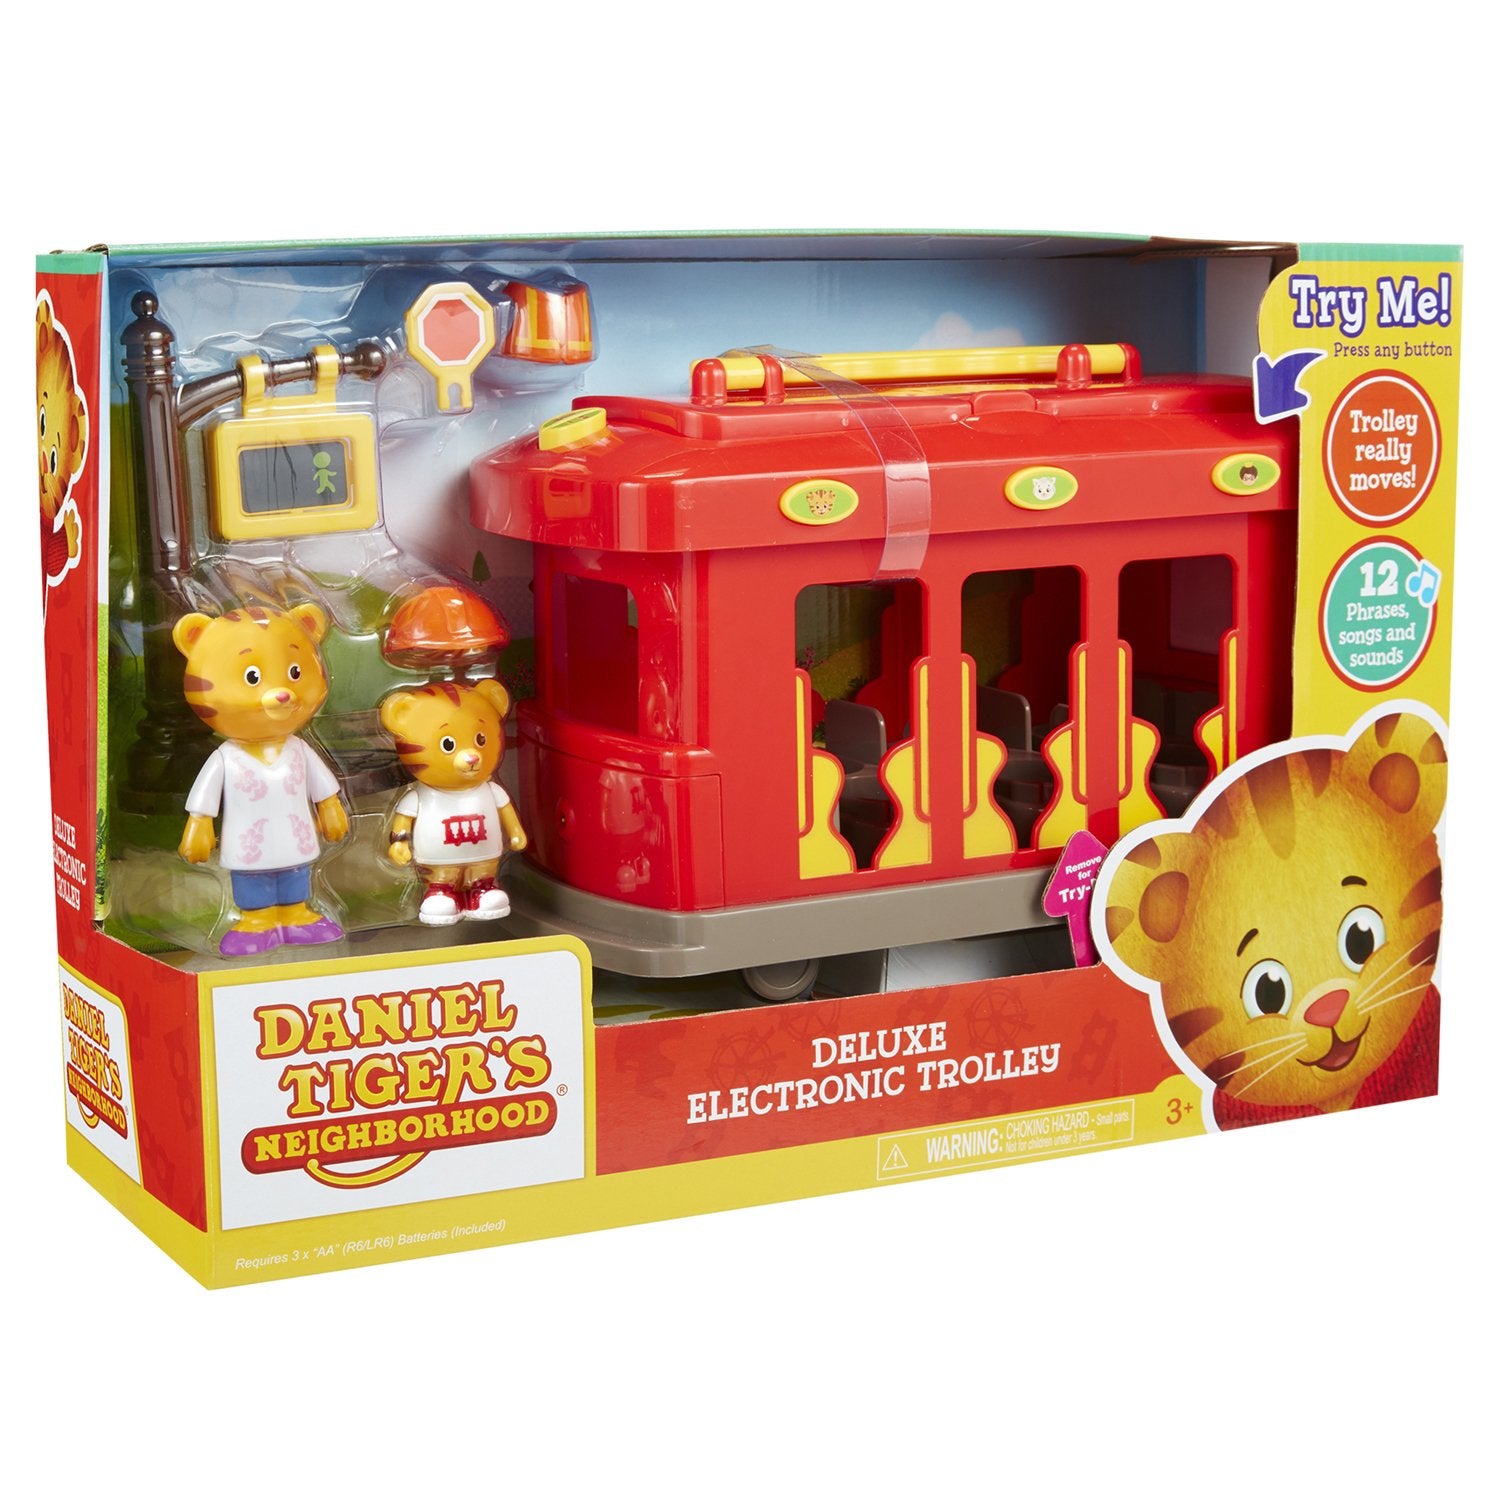 Daniel Tiger's Neighborhood Deluxe Electronic Trolley Vehicle with 2 Songs, 12 Phrases, Trolley Sounds & Light!